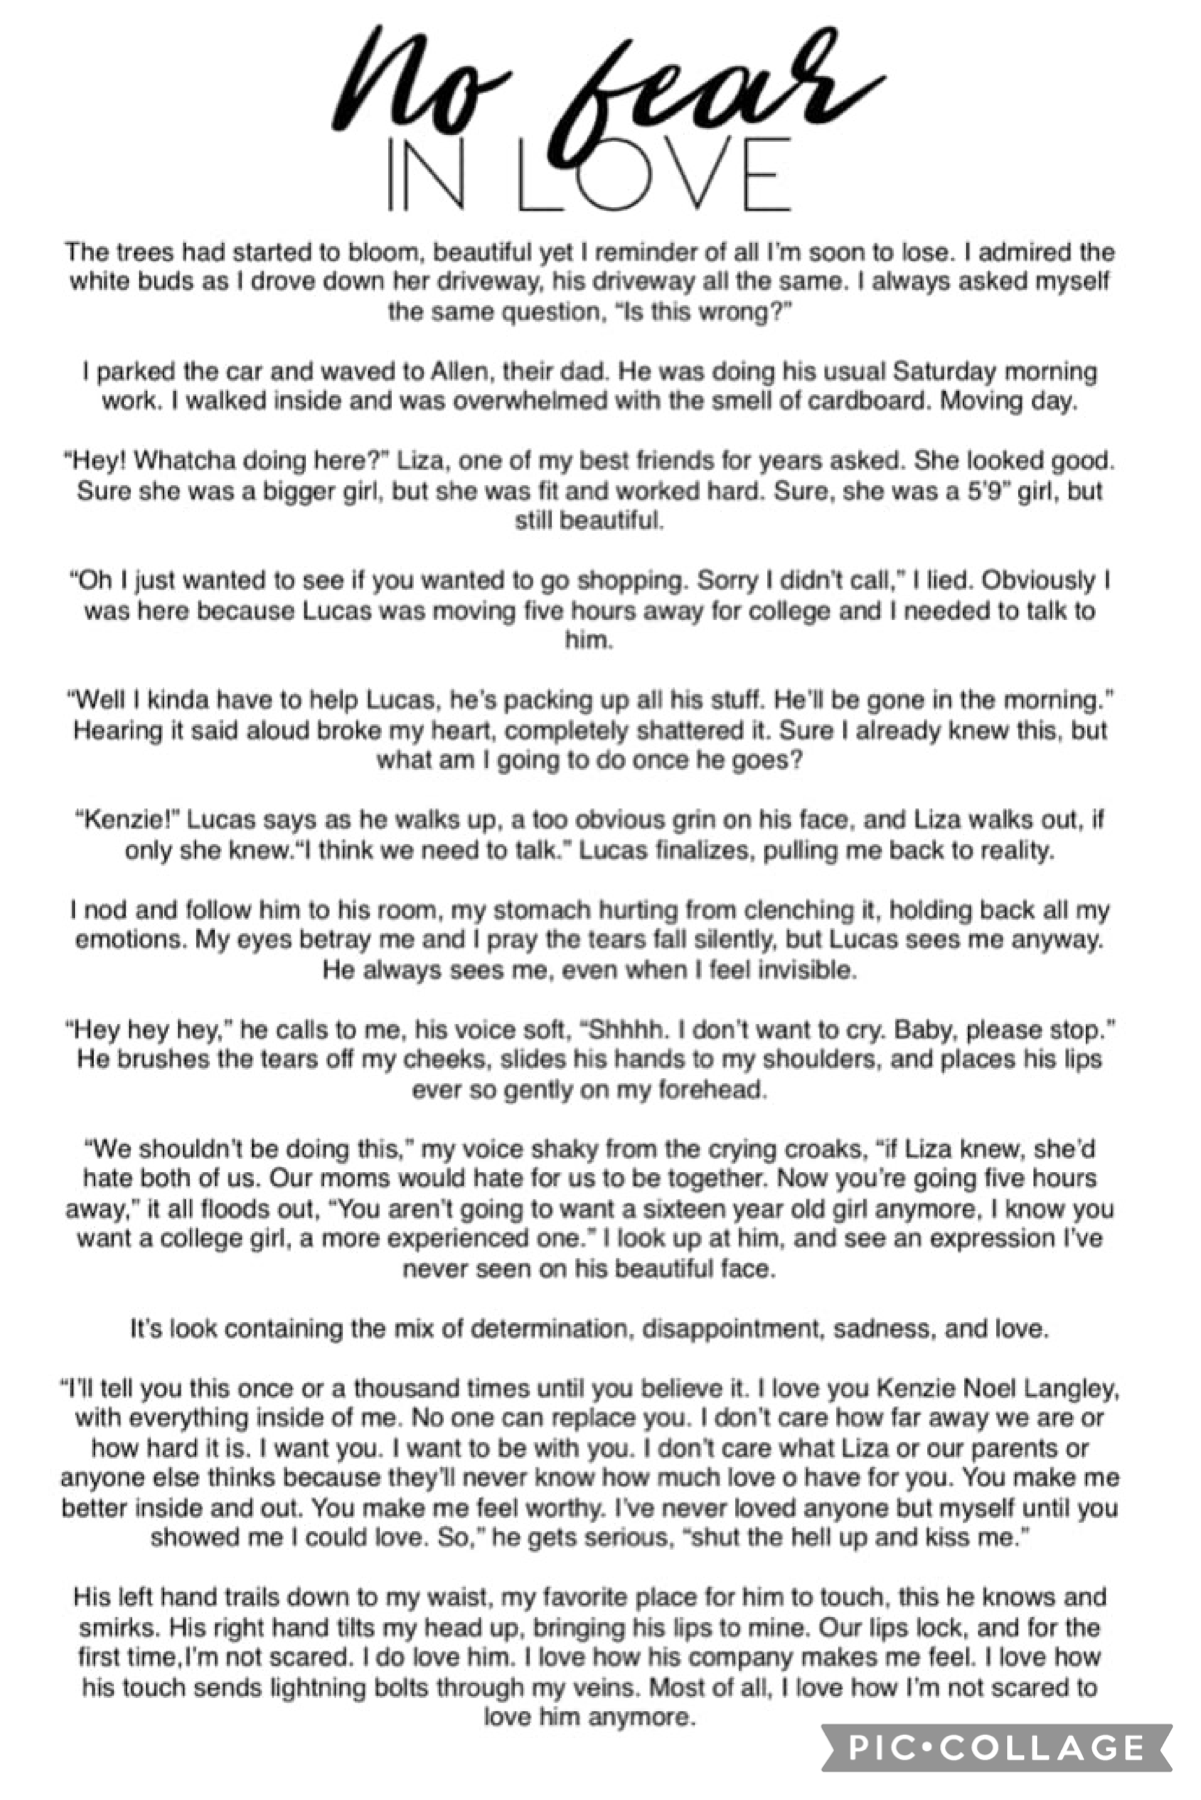 Here’s something a little different for you guys. It’s actually a short story I wrote for a contest. I haven’t written like this in a while so I’m kinda rusty but I figured I’d give you guys something different✨🥸